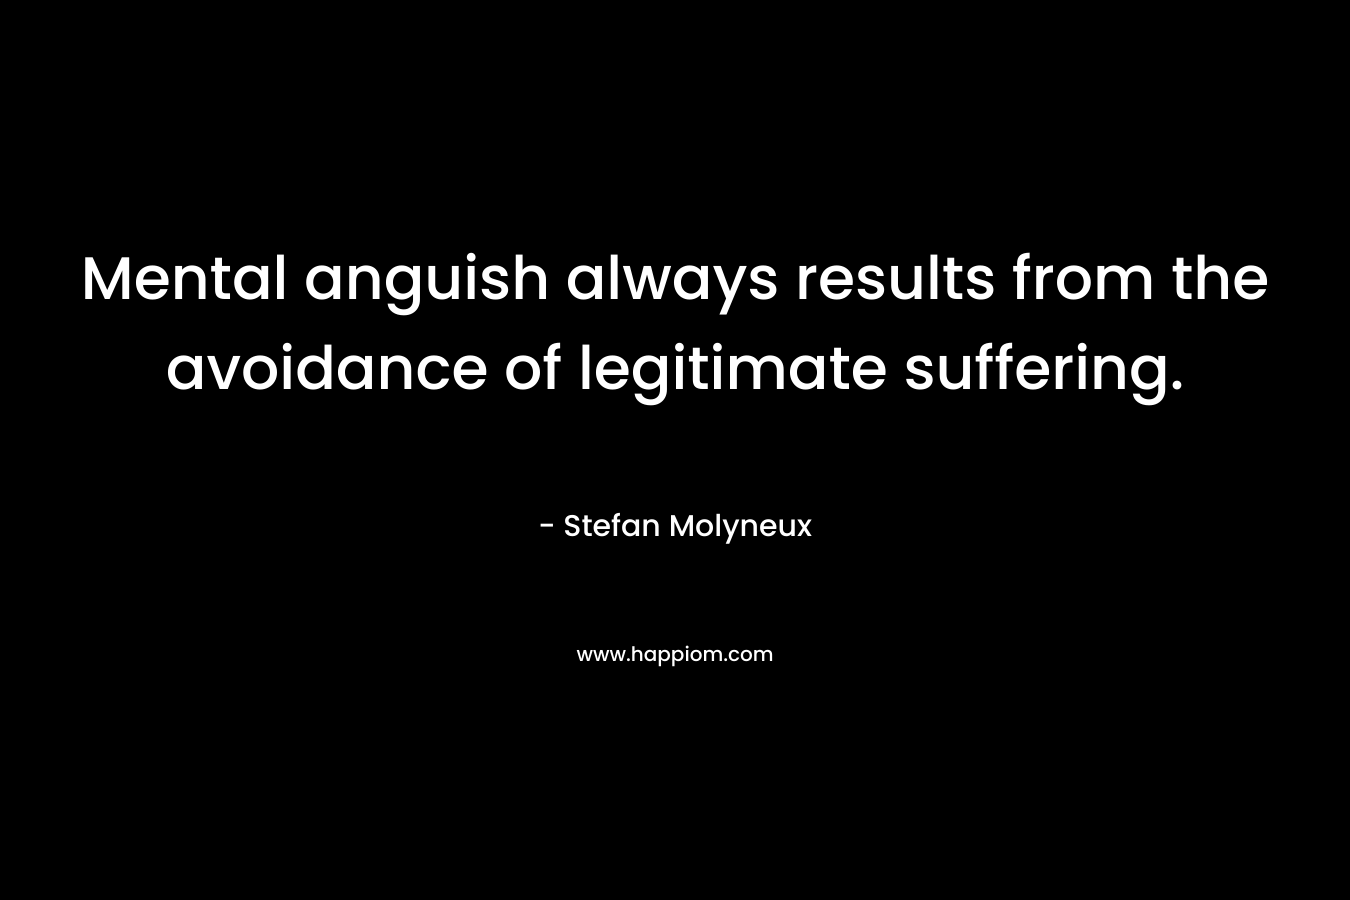 Mental anguish always results from the avoidance of legitimate suffering. – Stefan Molyneux